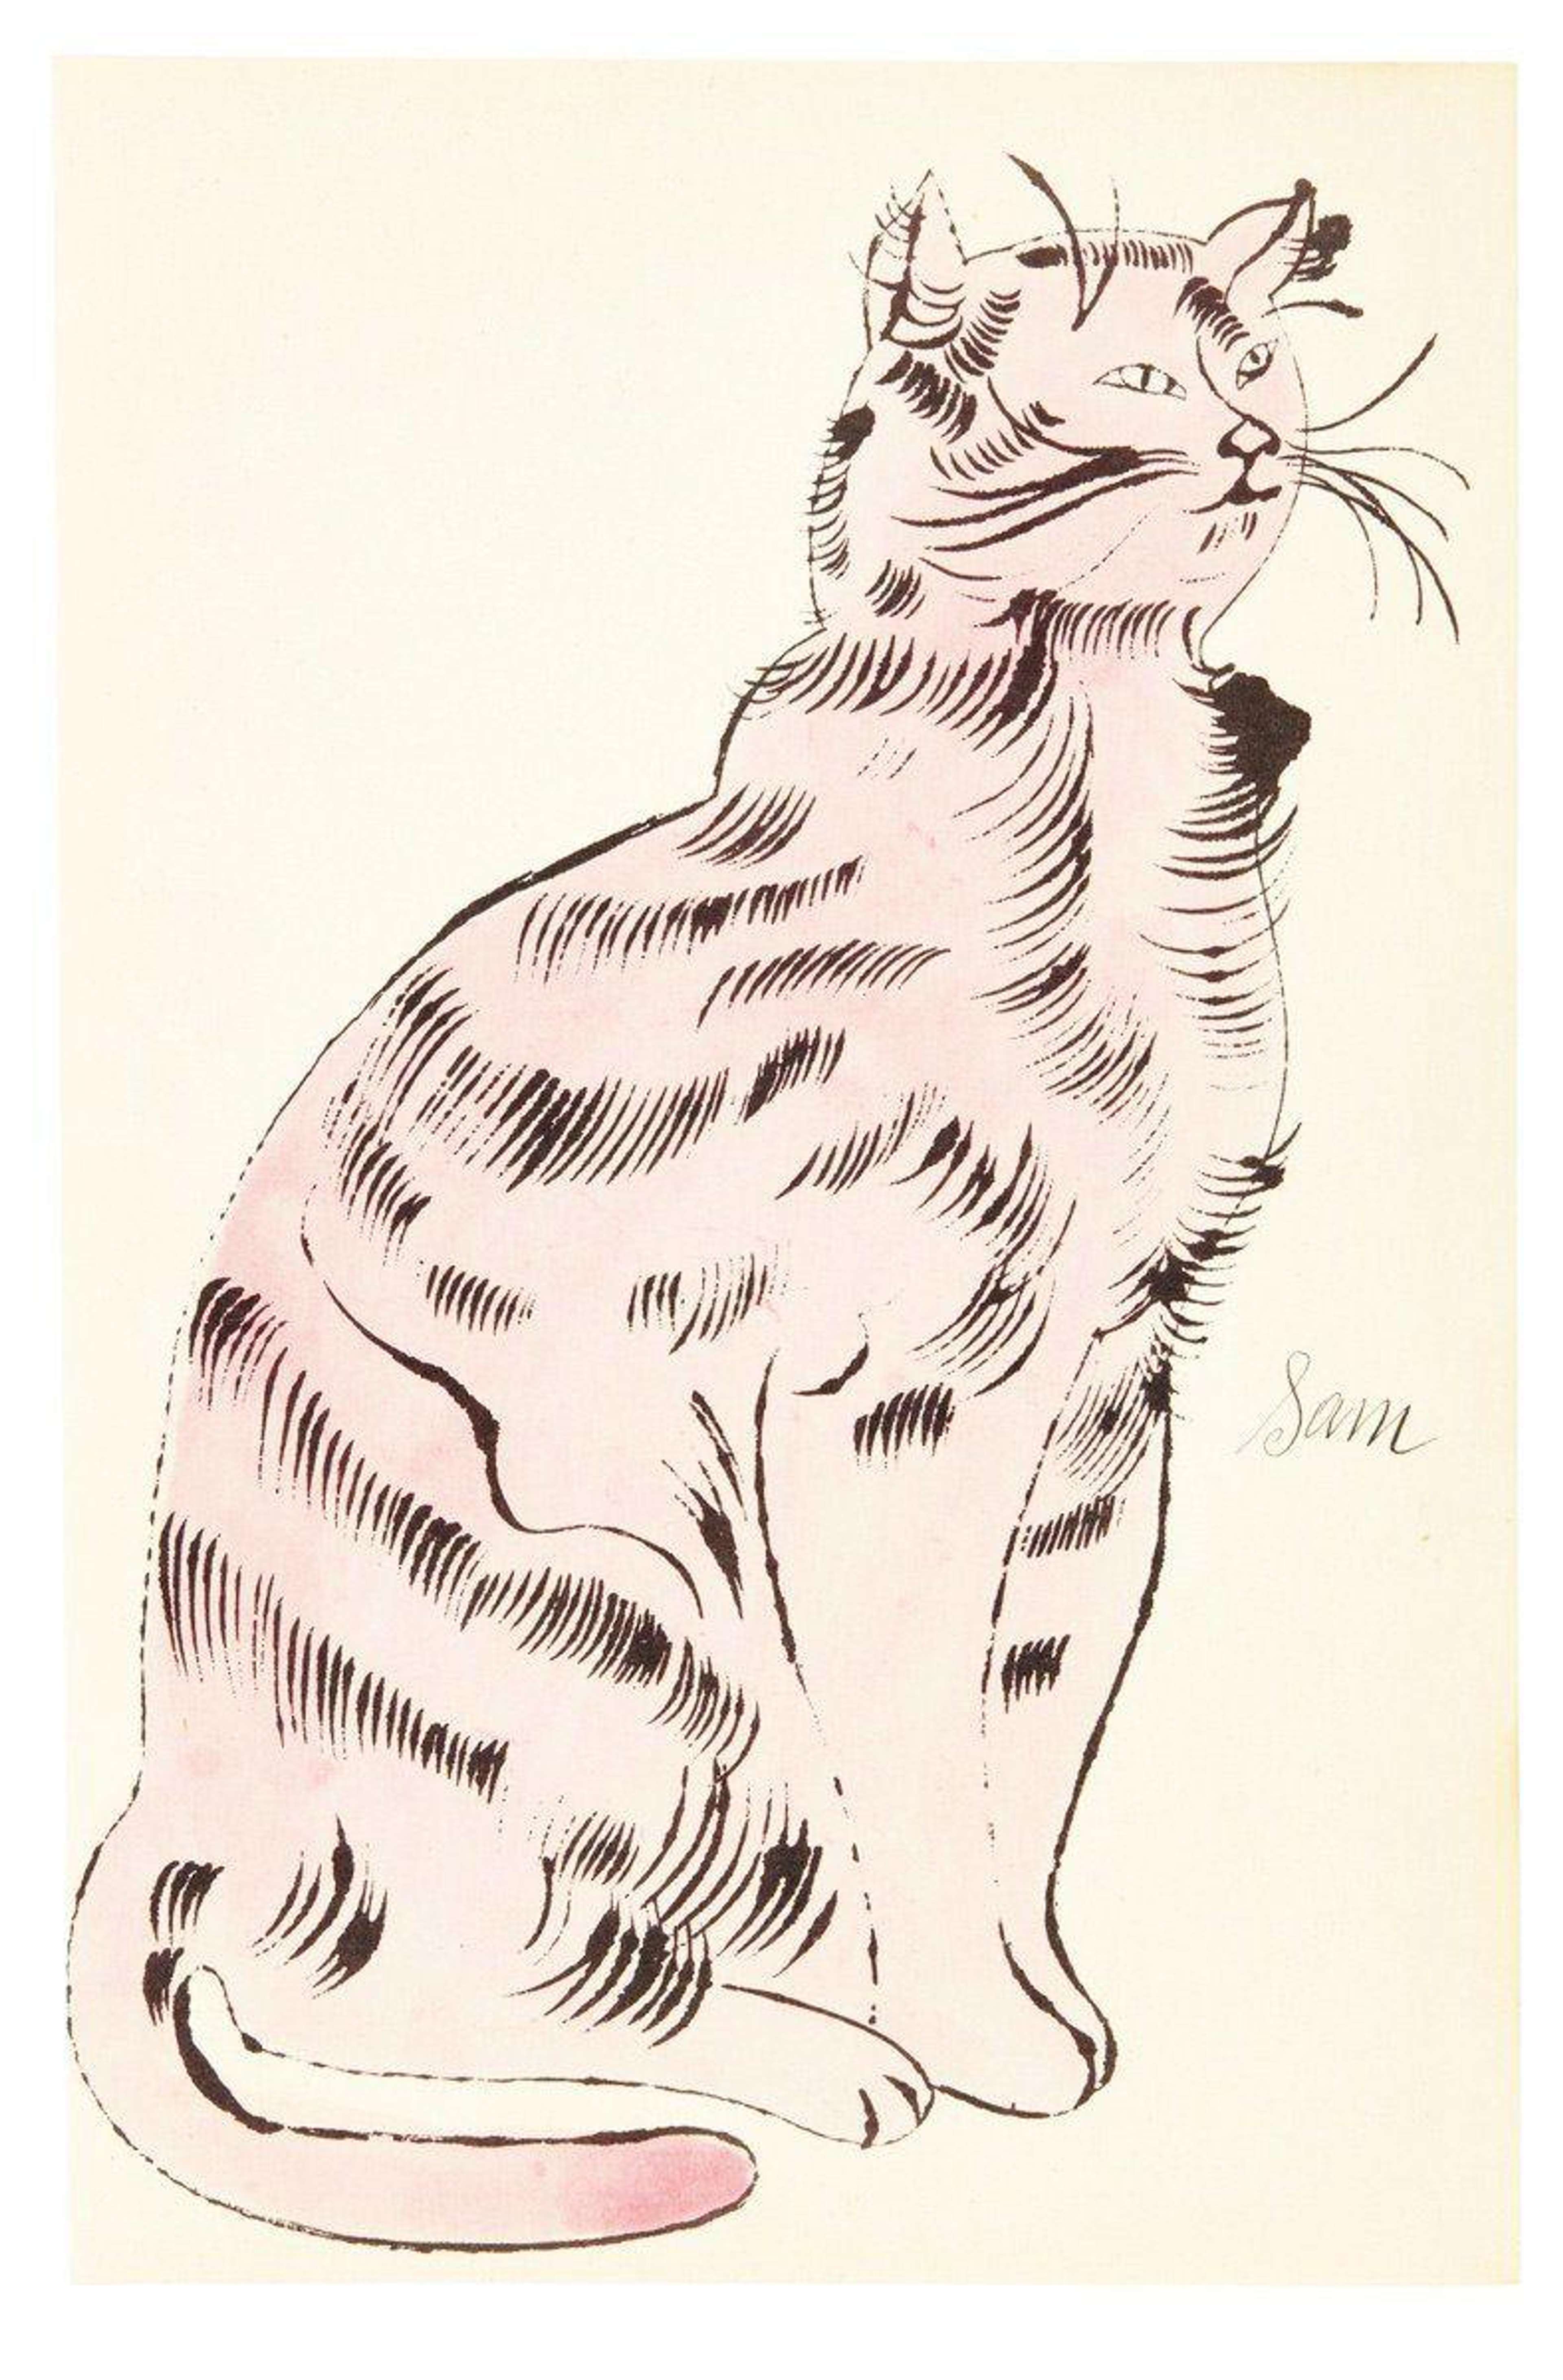 Cats Named Sam IV 56 - Unsigned Print